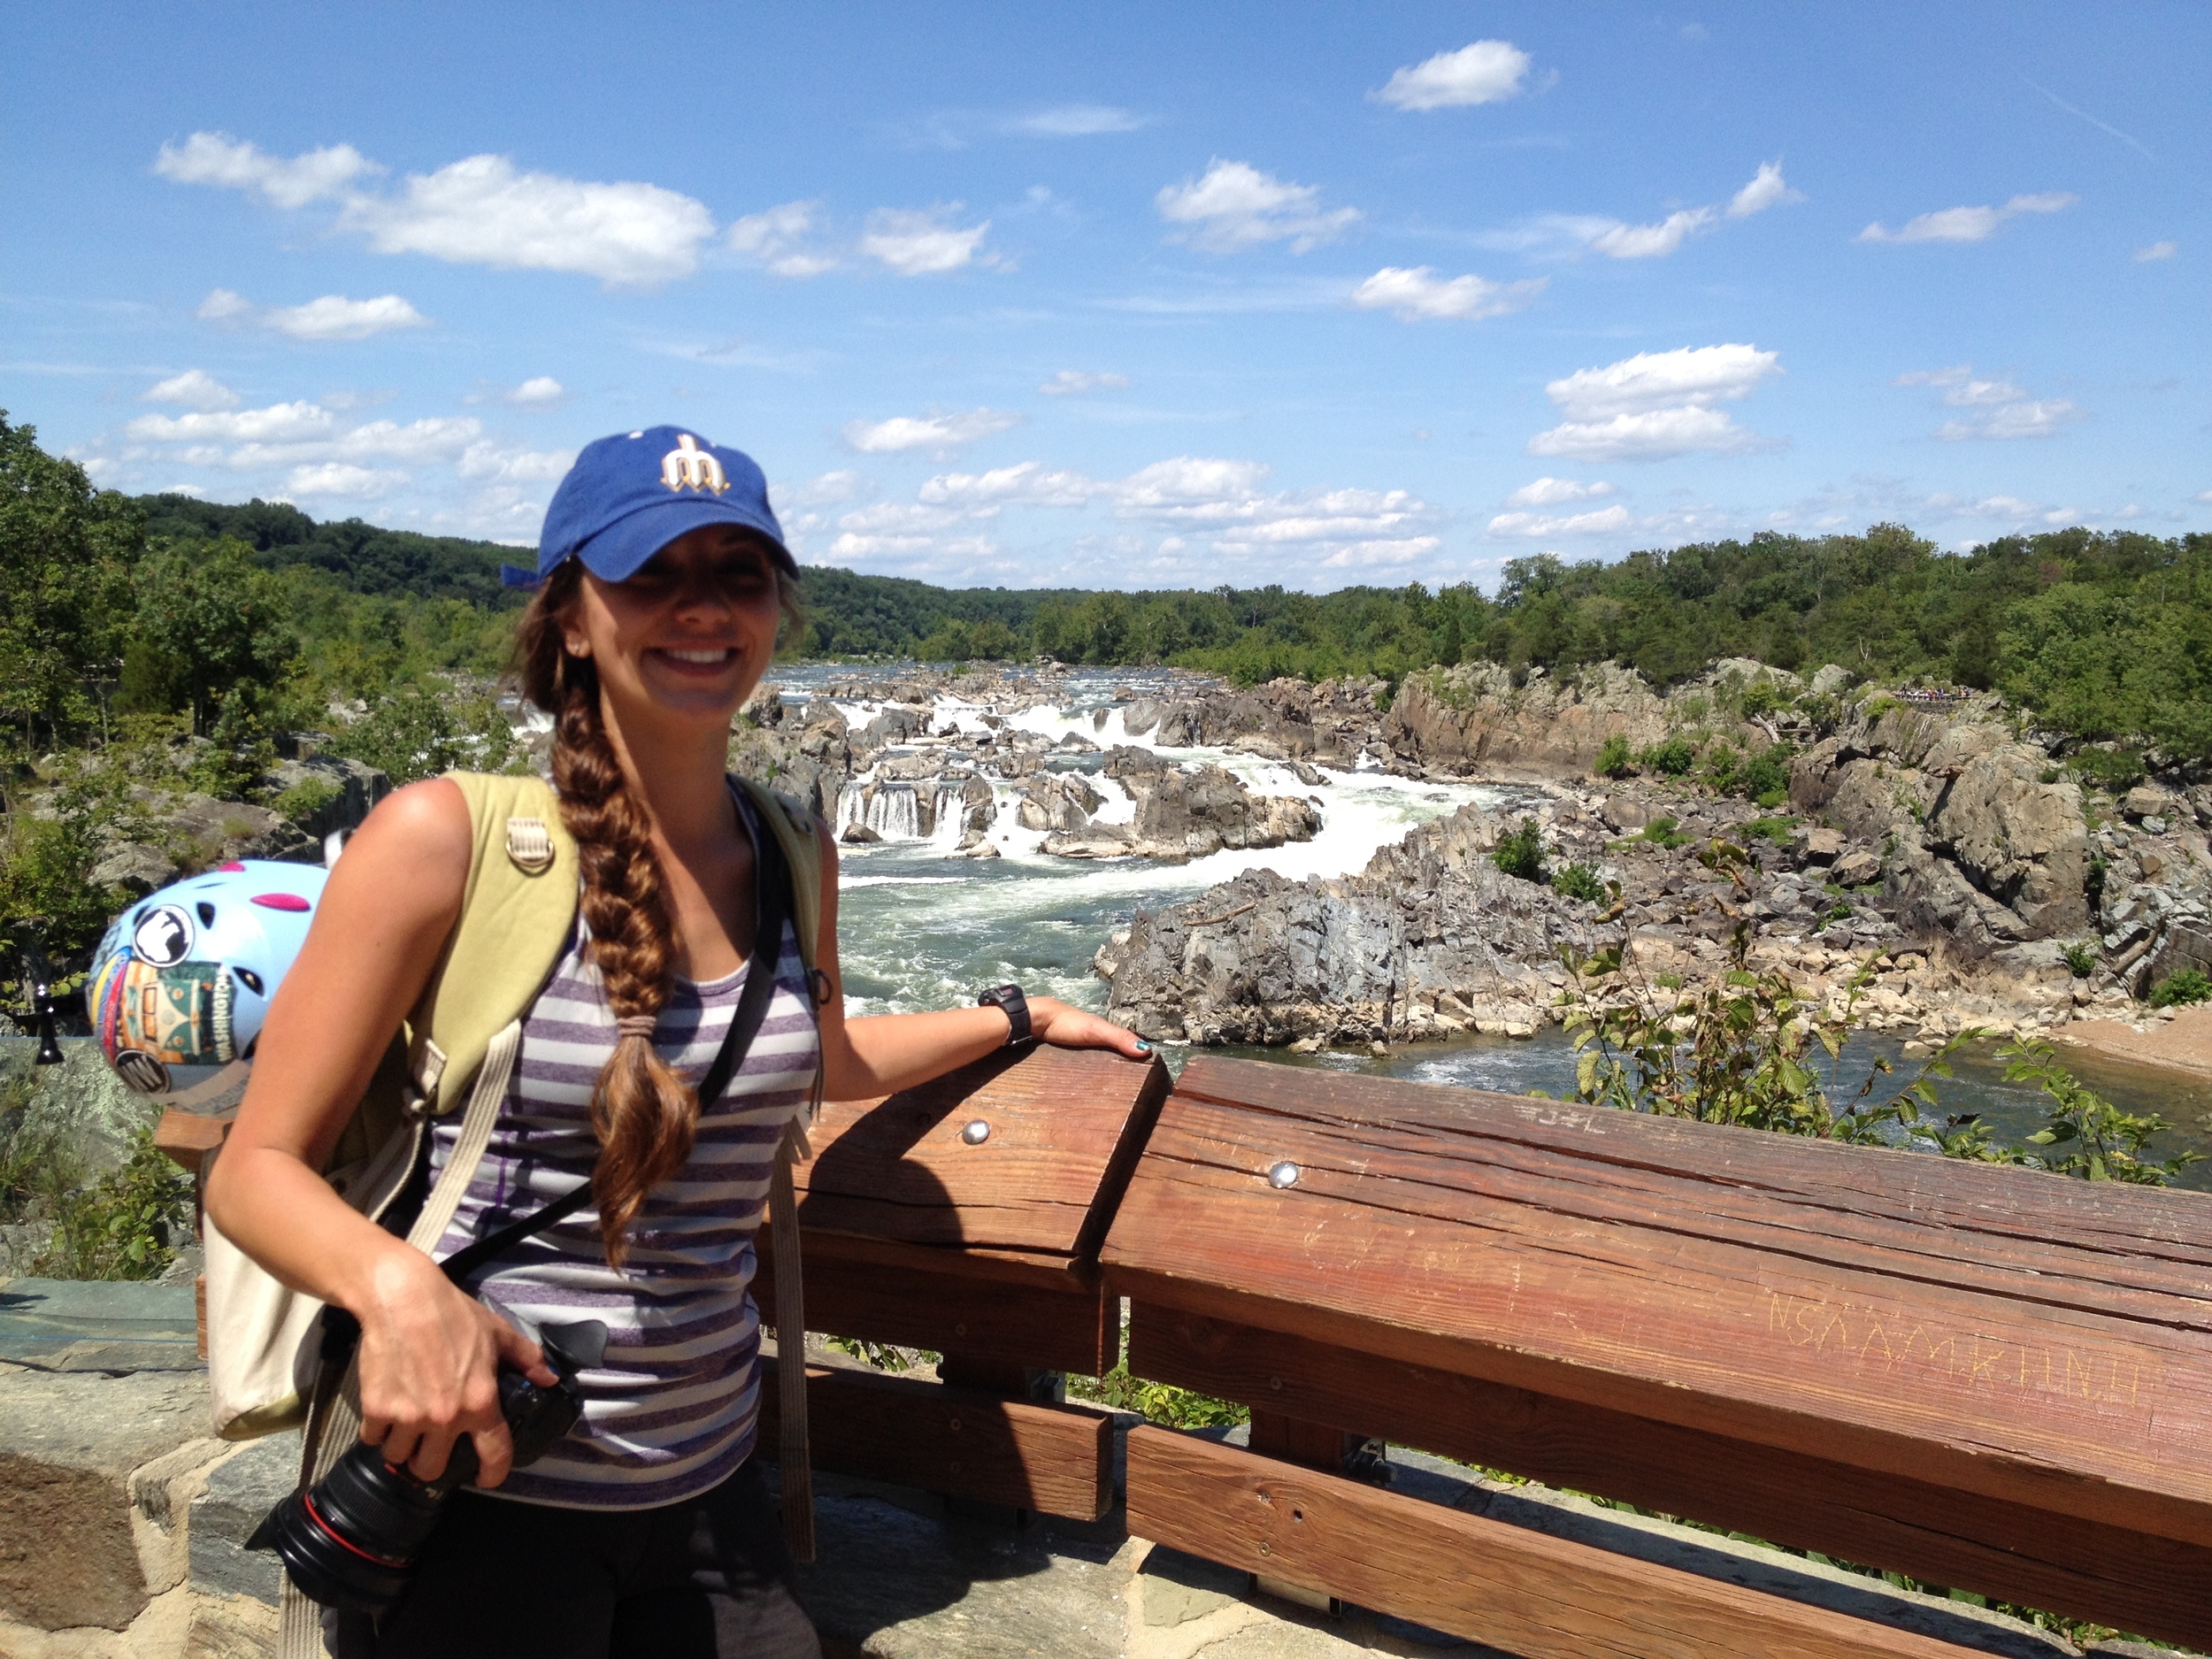 On Assignment. Great Falls National Park, Virginia